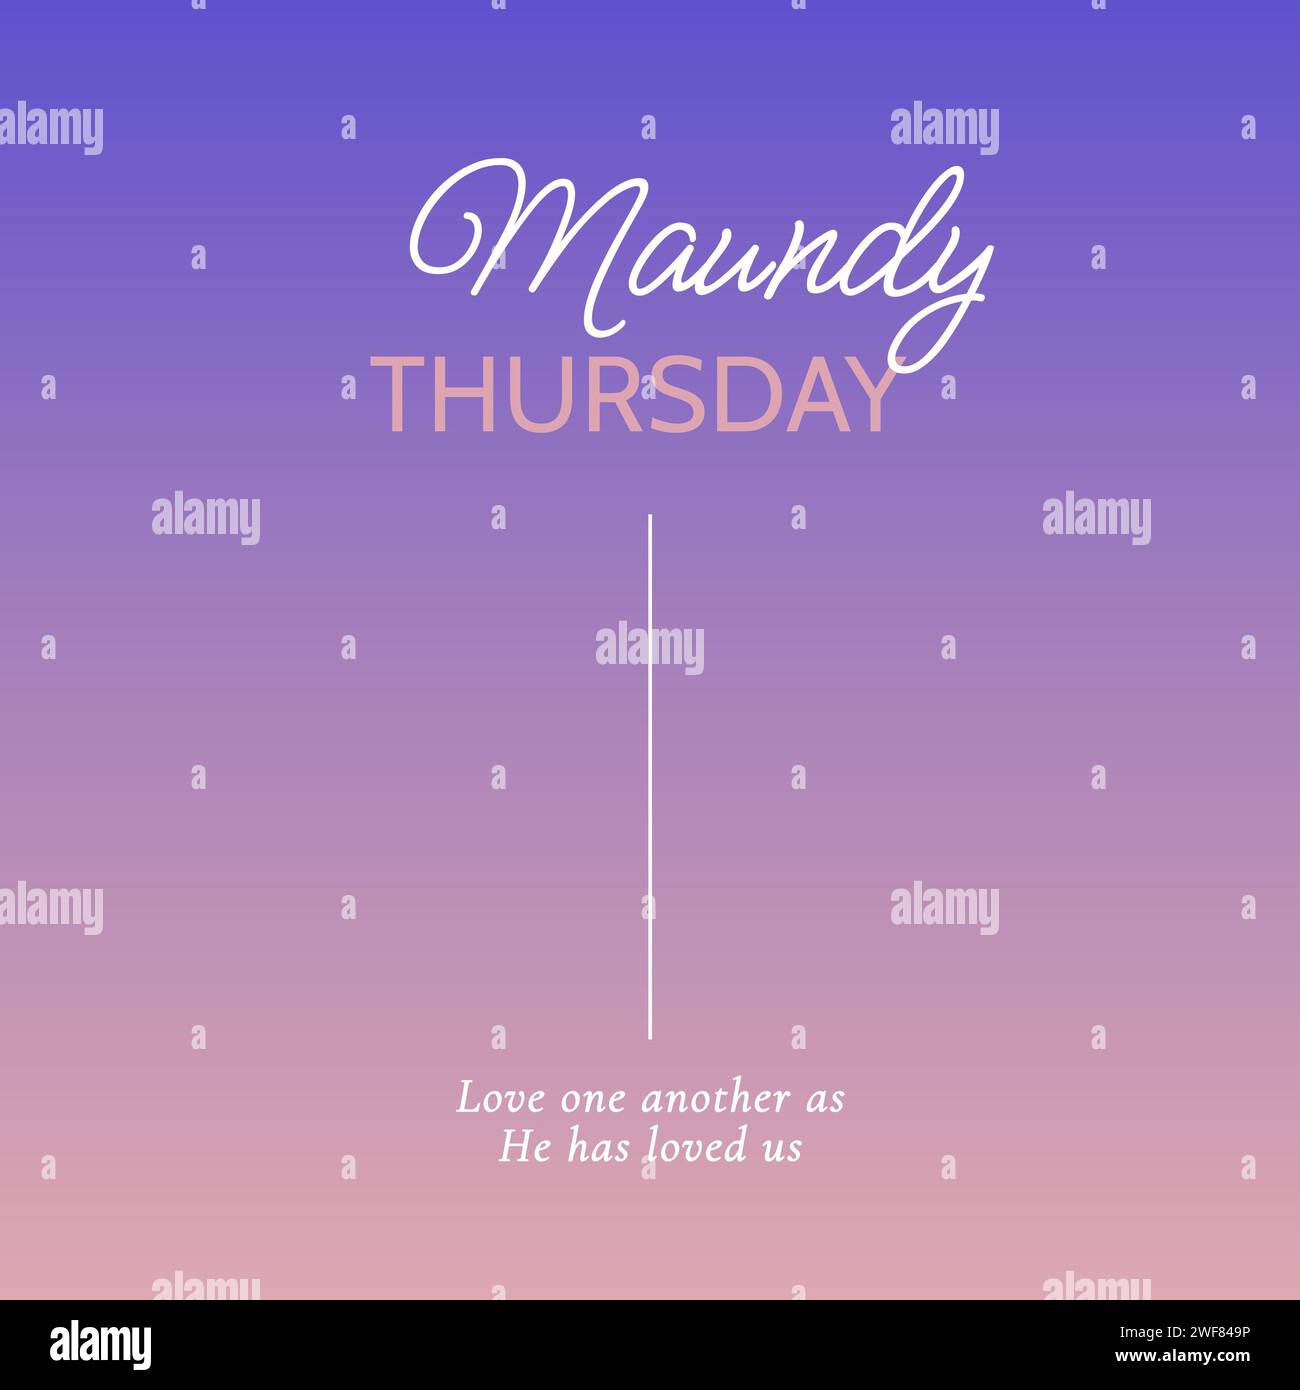 Composition of maundy thursday text on purple background Stock Photo